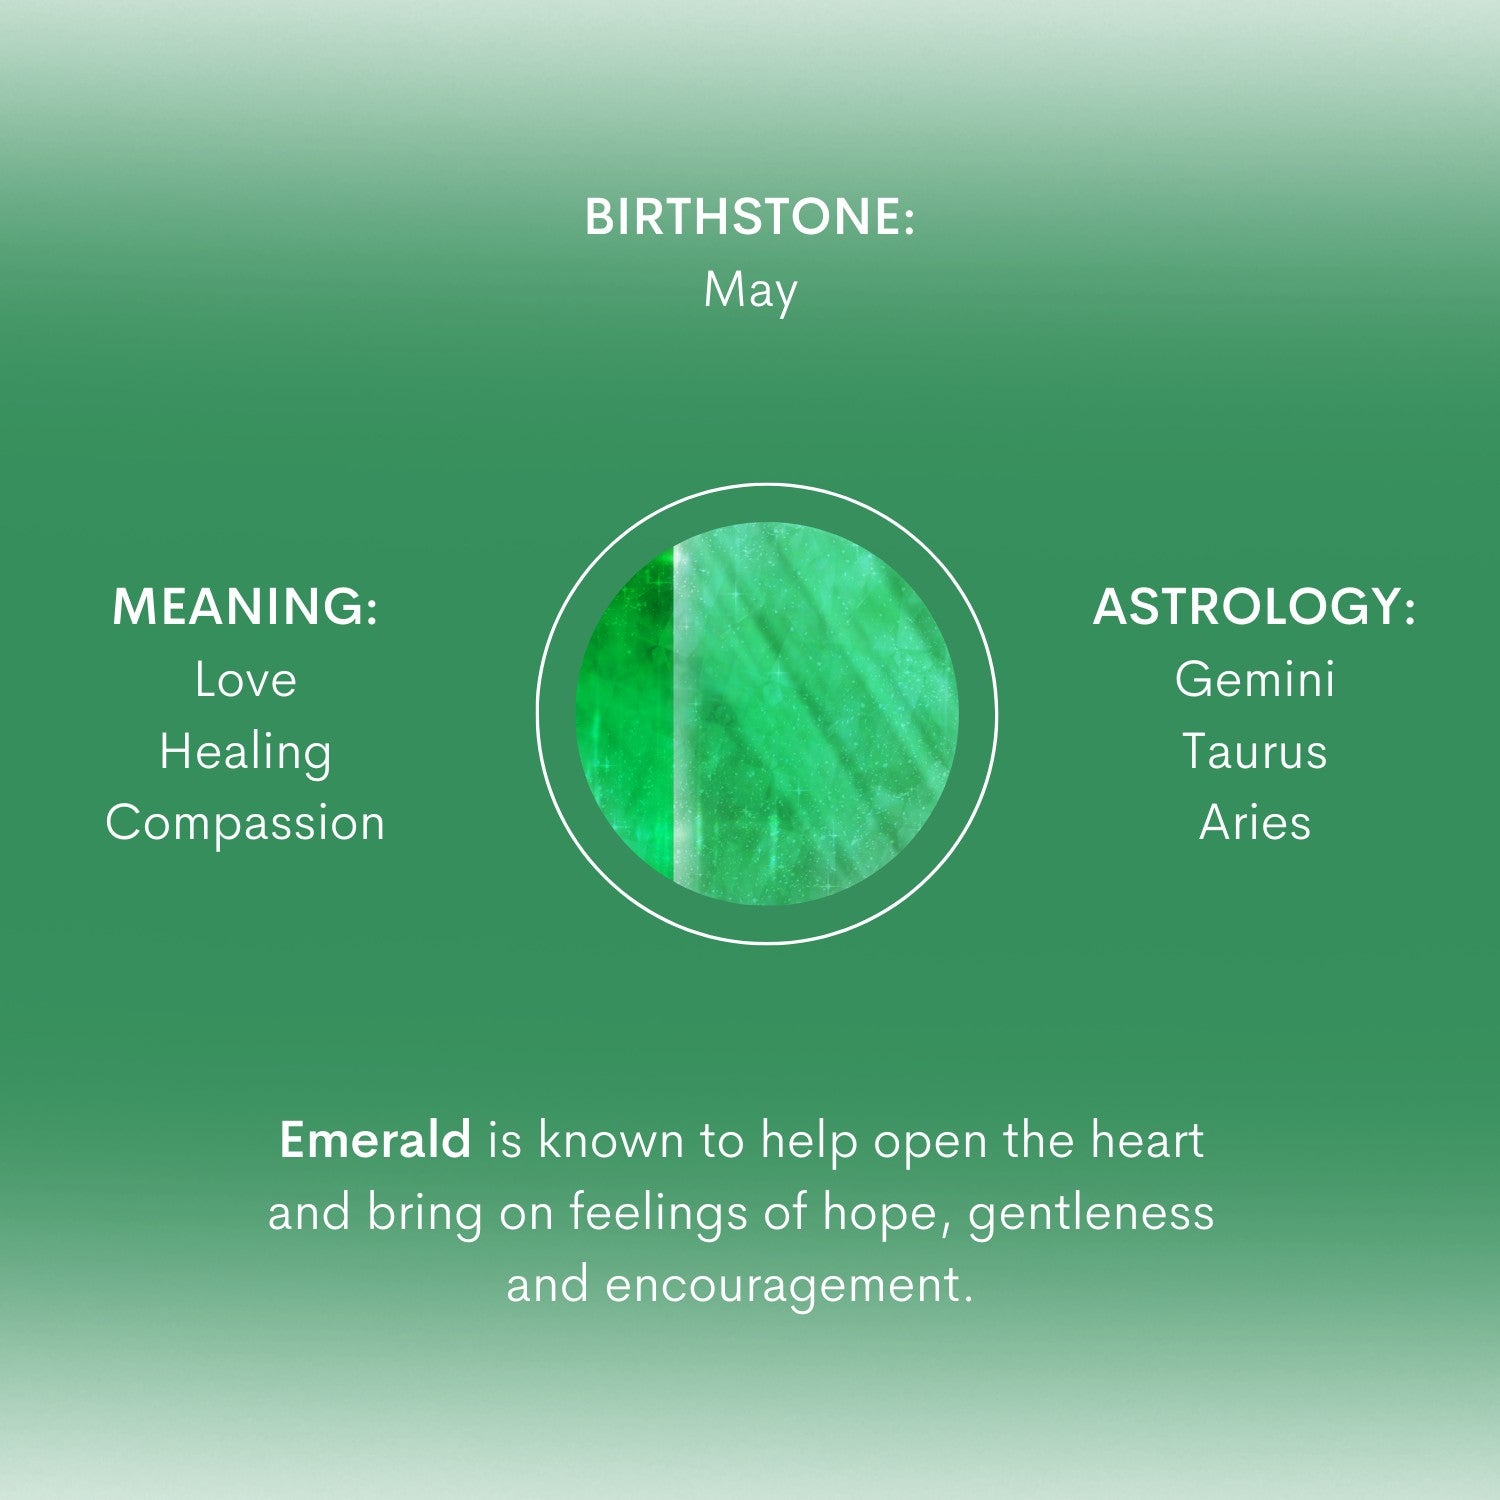 merald is known to help open the heart and bring feelings of hope, gentleness and encouragement.